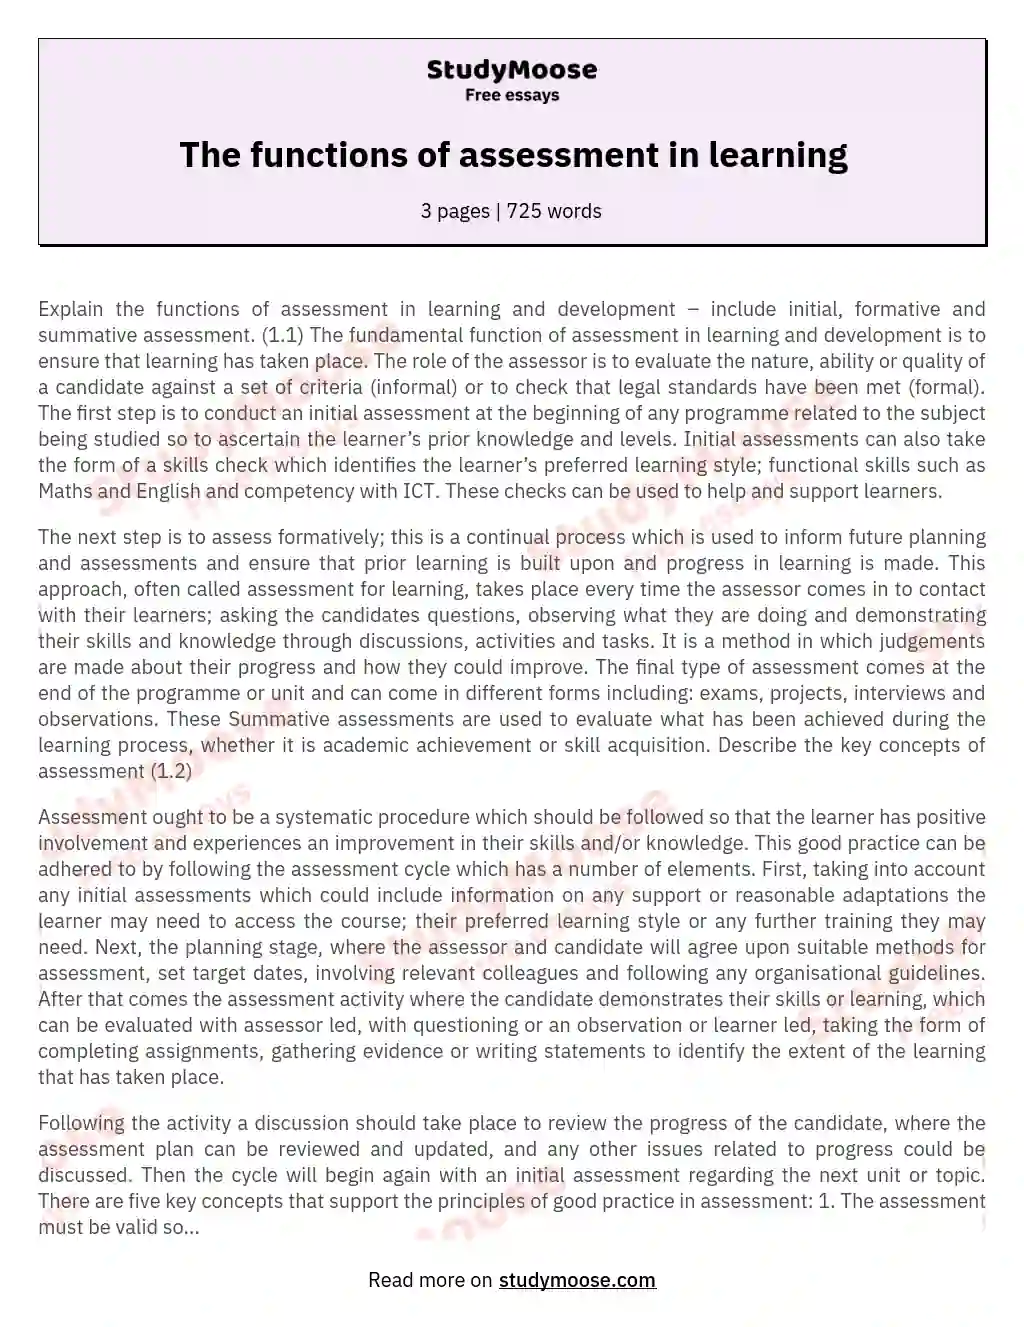 The functions of assessment in learning